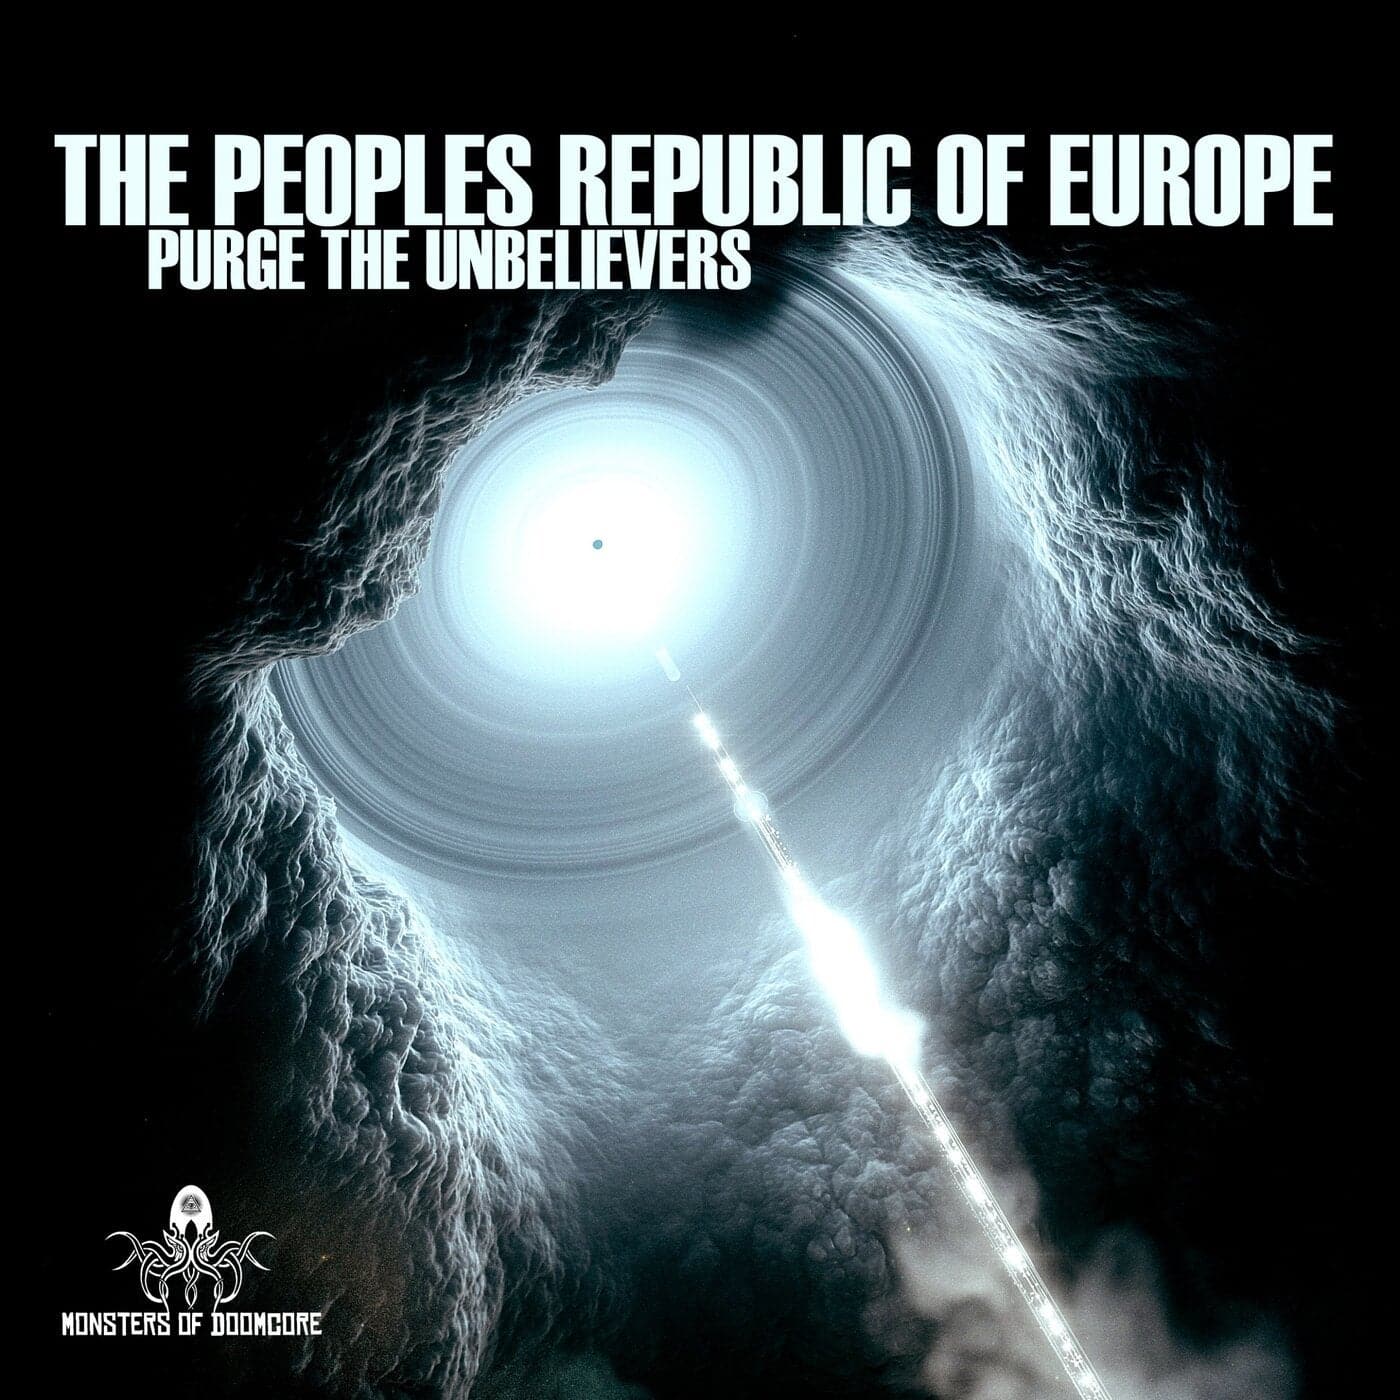 Download The Peoples Republic Of Europe - Purge The Unbelievers on Electrobuzz